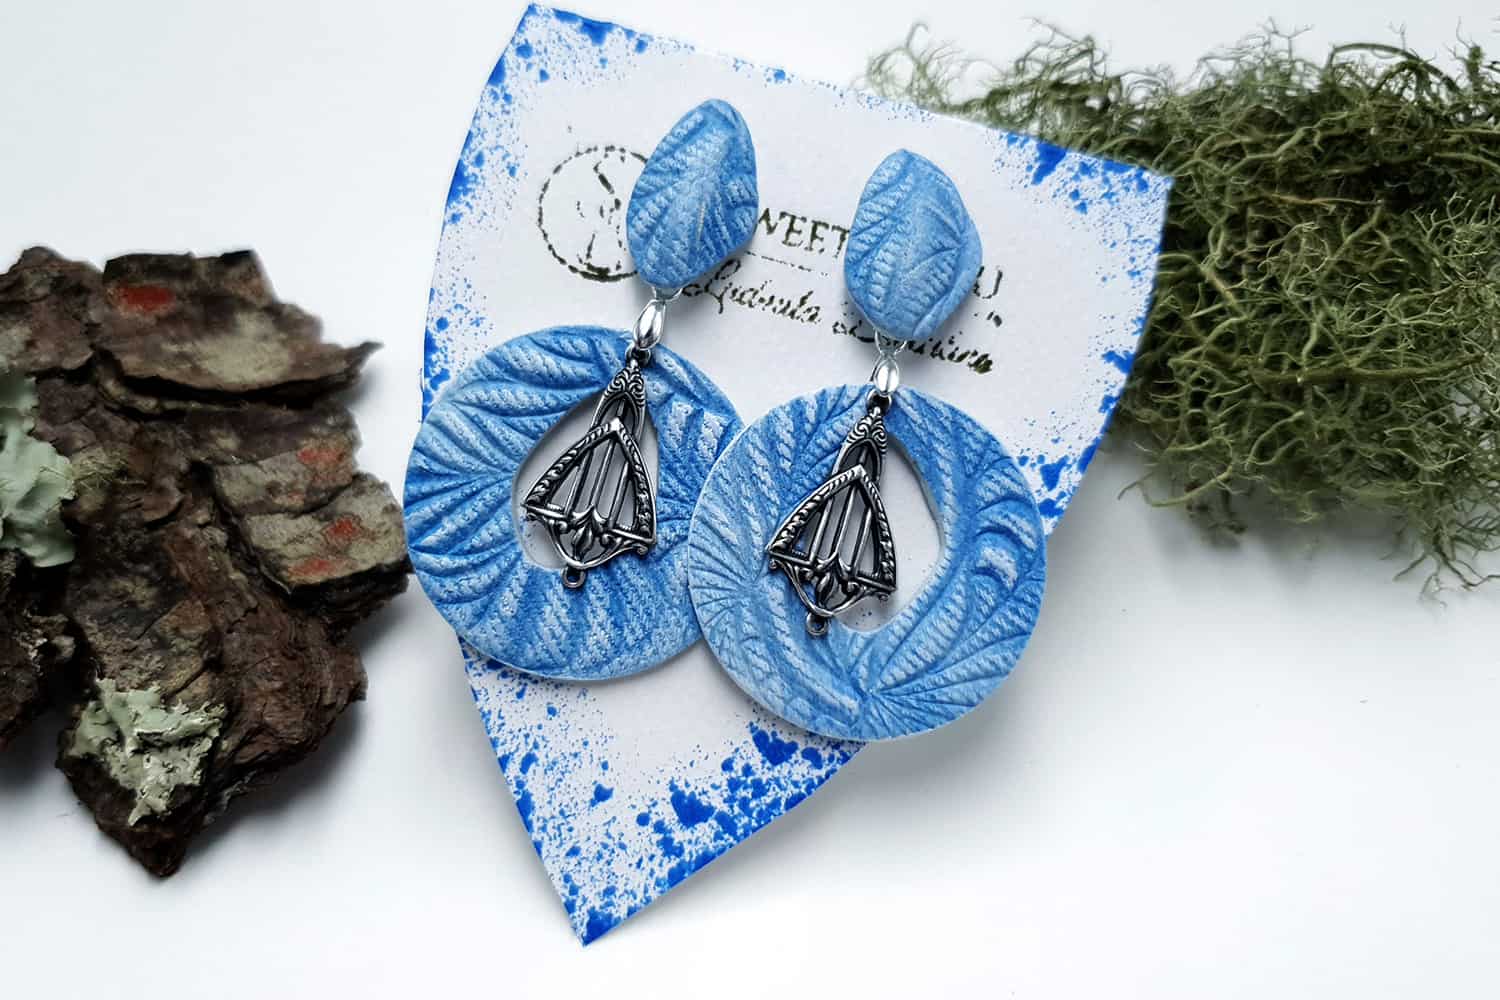 Jewelry from "Faux Jeans/Denim Fabric" course for your inspiration #12